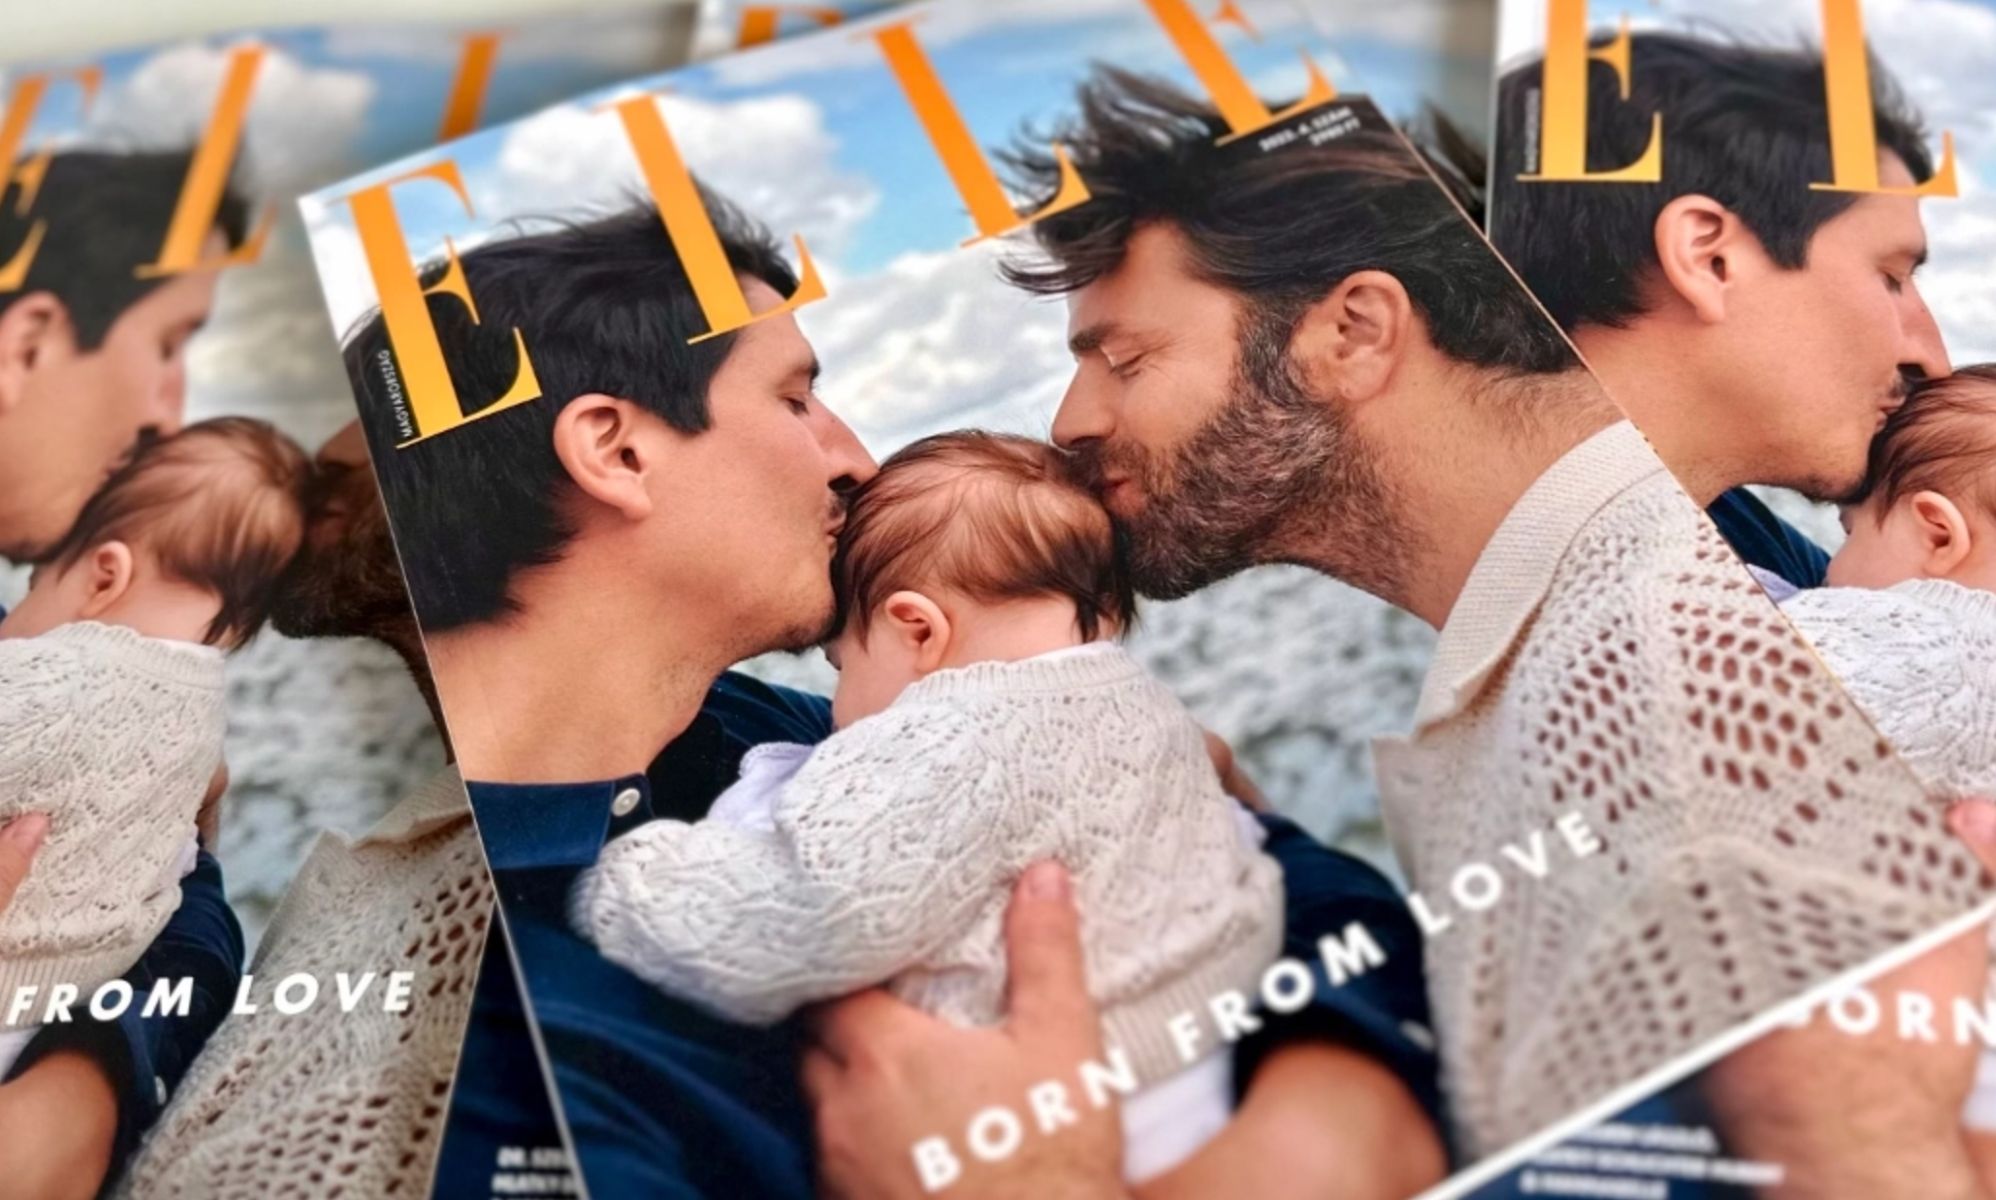 Elle Hungary puts gay dads on cover in defiant display of allyship image picture